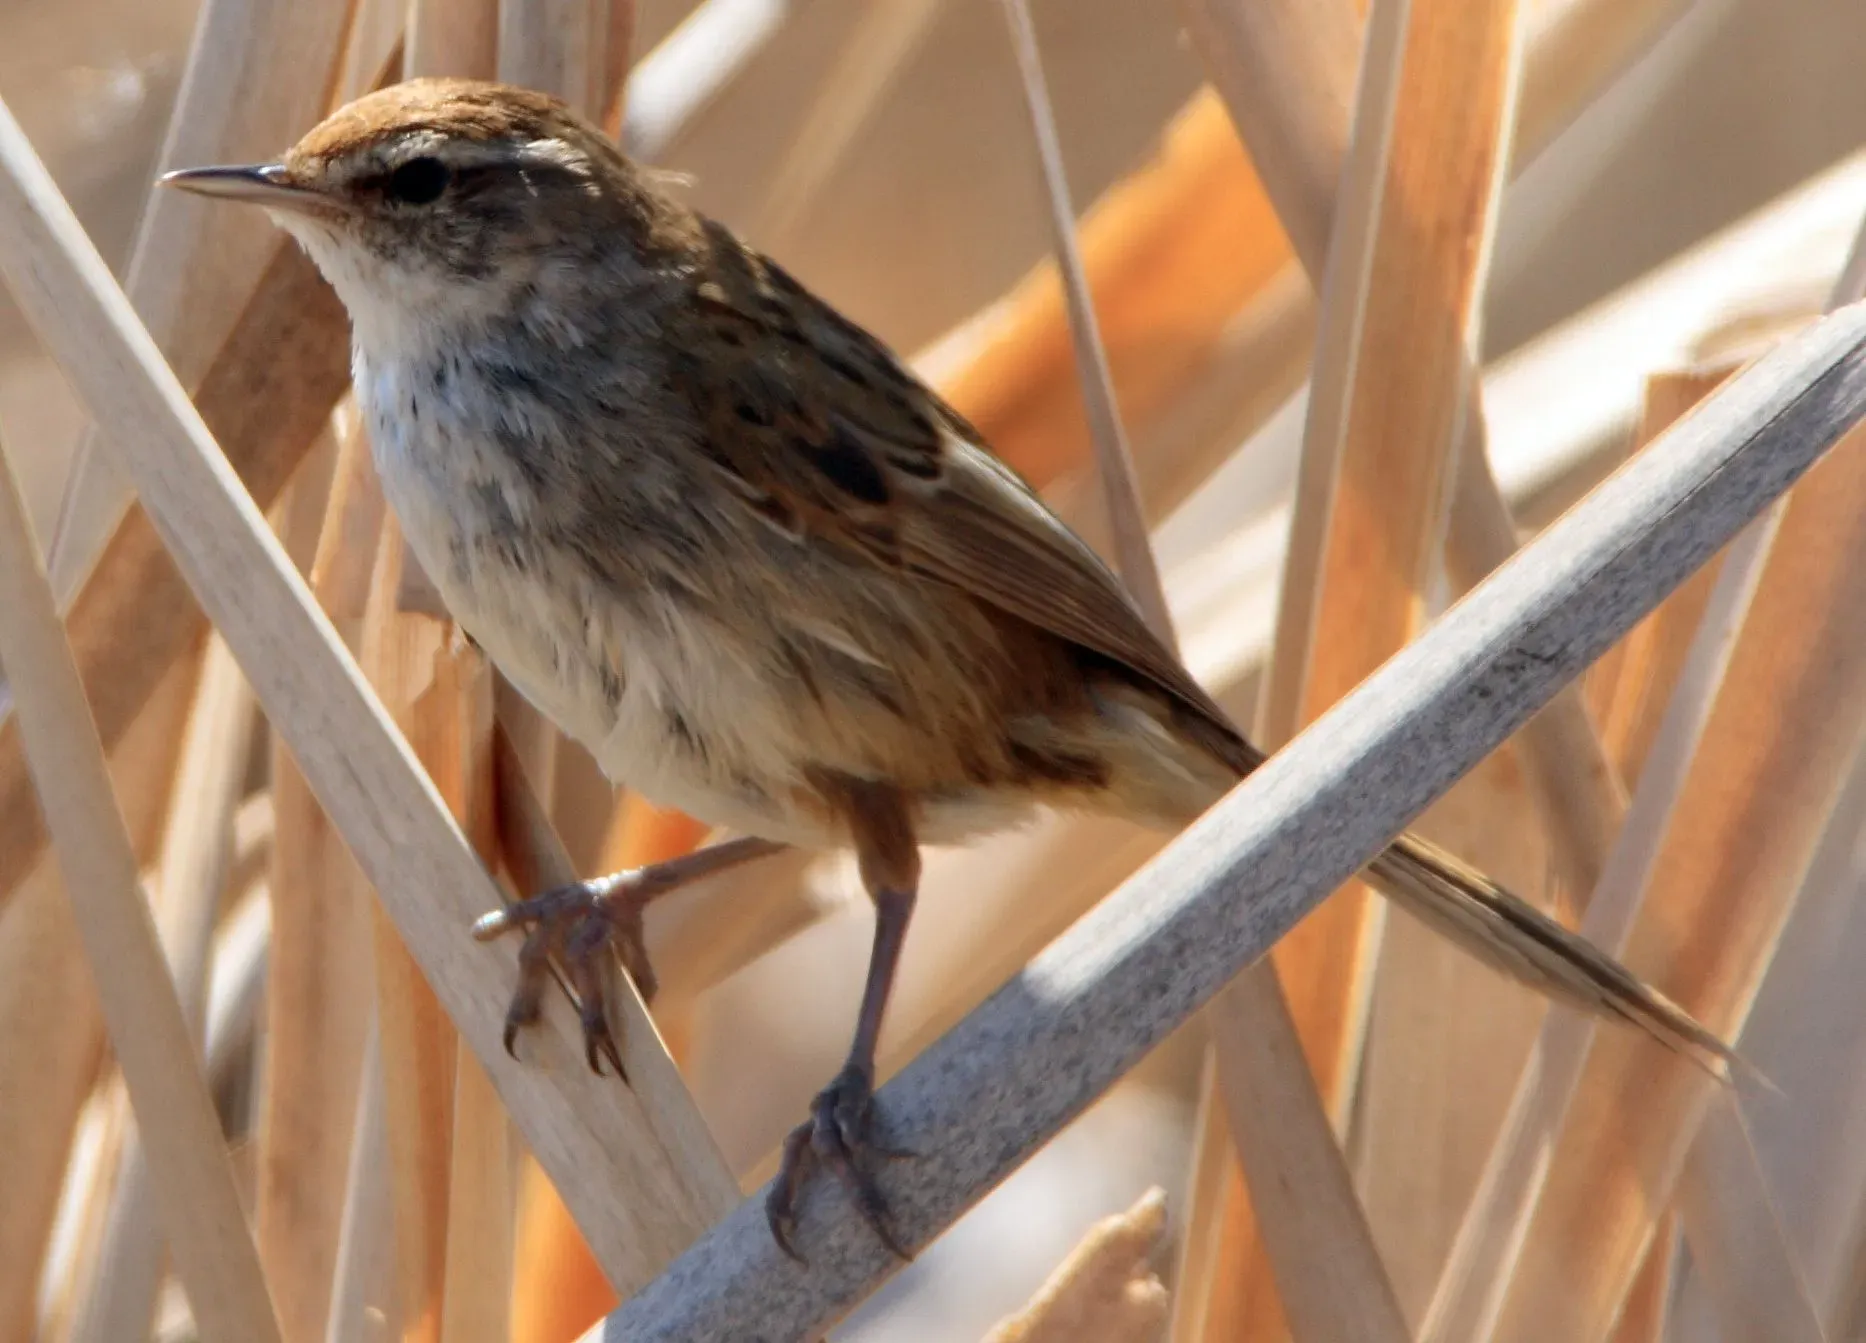 Little grassbirds have a brown-gray plumage with black stripes on the upper body.